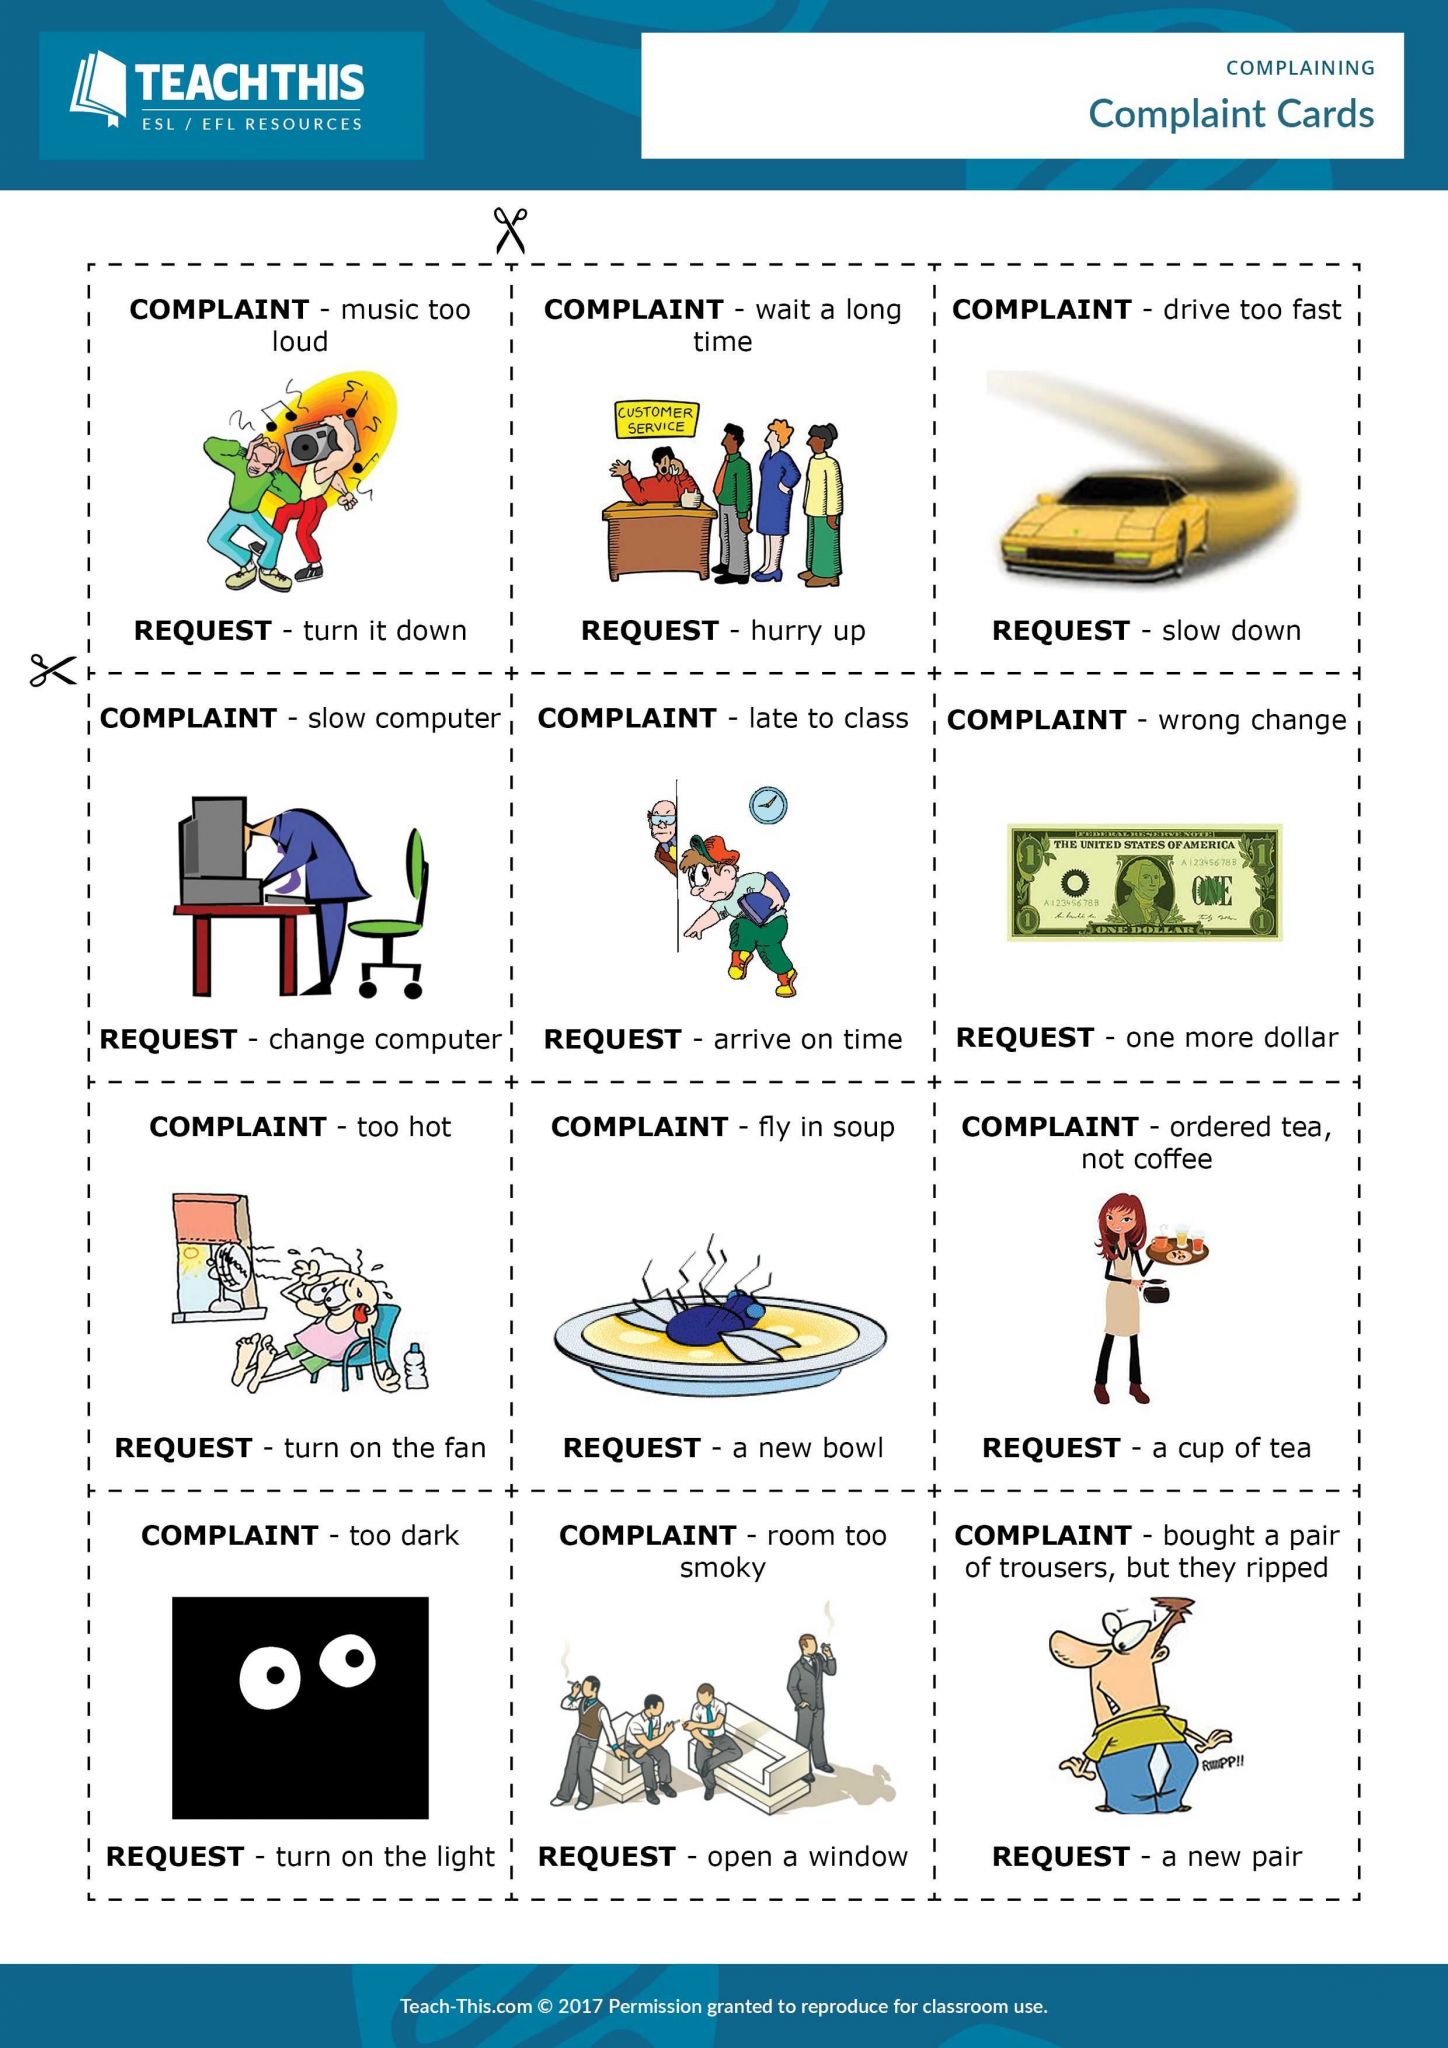 Inferences Worksheet 1 as Well as Fun Worksheets for Students Luxury Media Cache Ec0 Pinimg originals